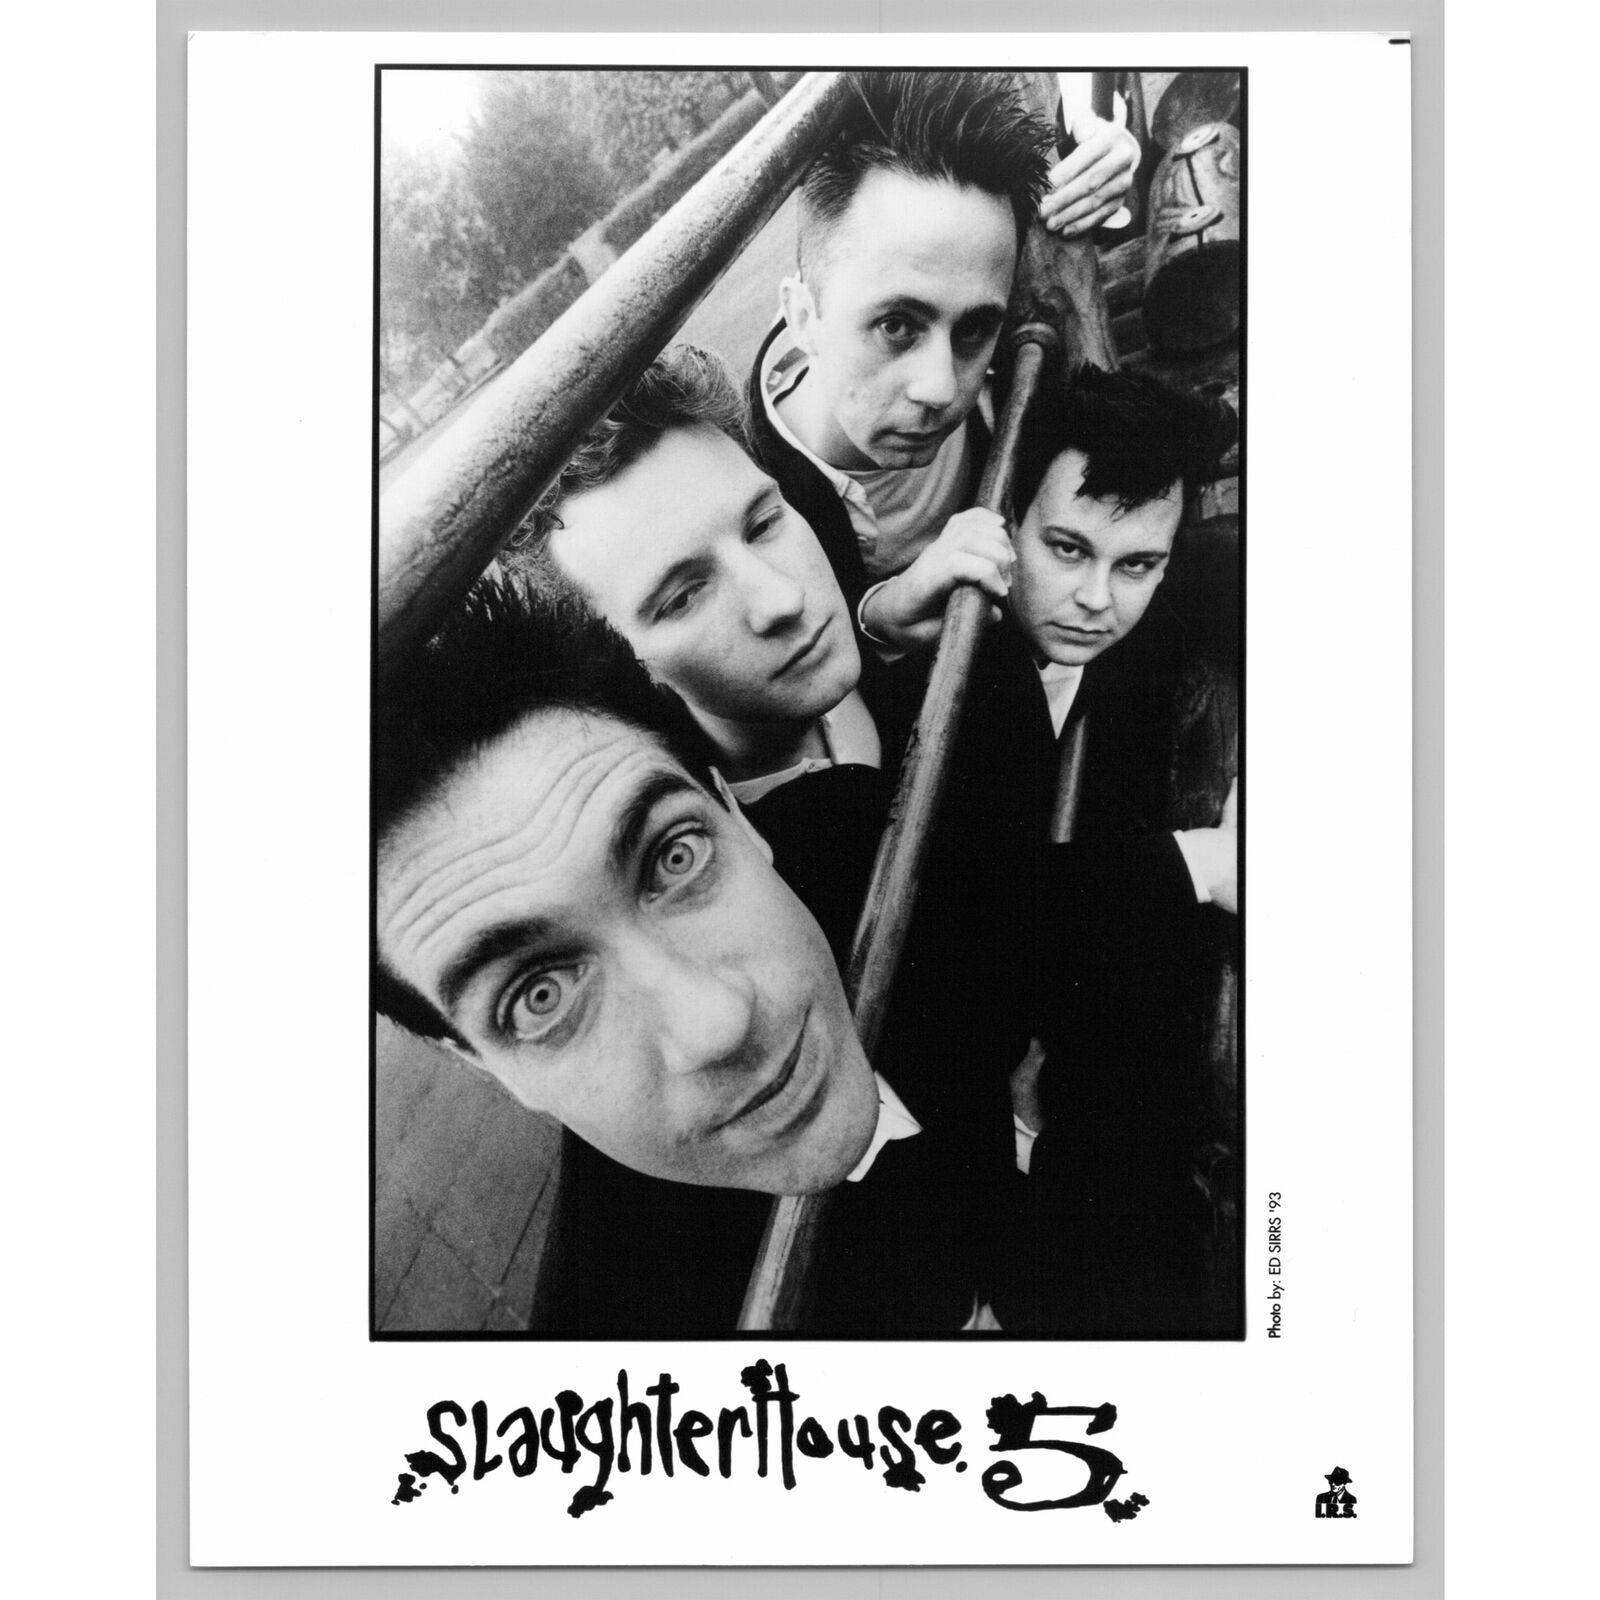 Slaughterhouse 5 Indie Power Pop Rock Band 80s-90s Glossy Music Press Photo